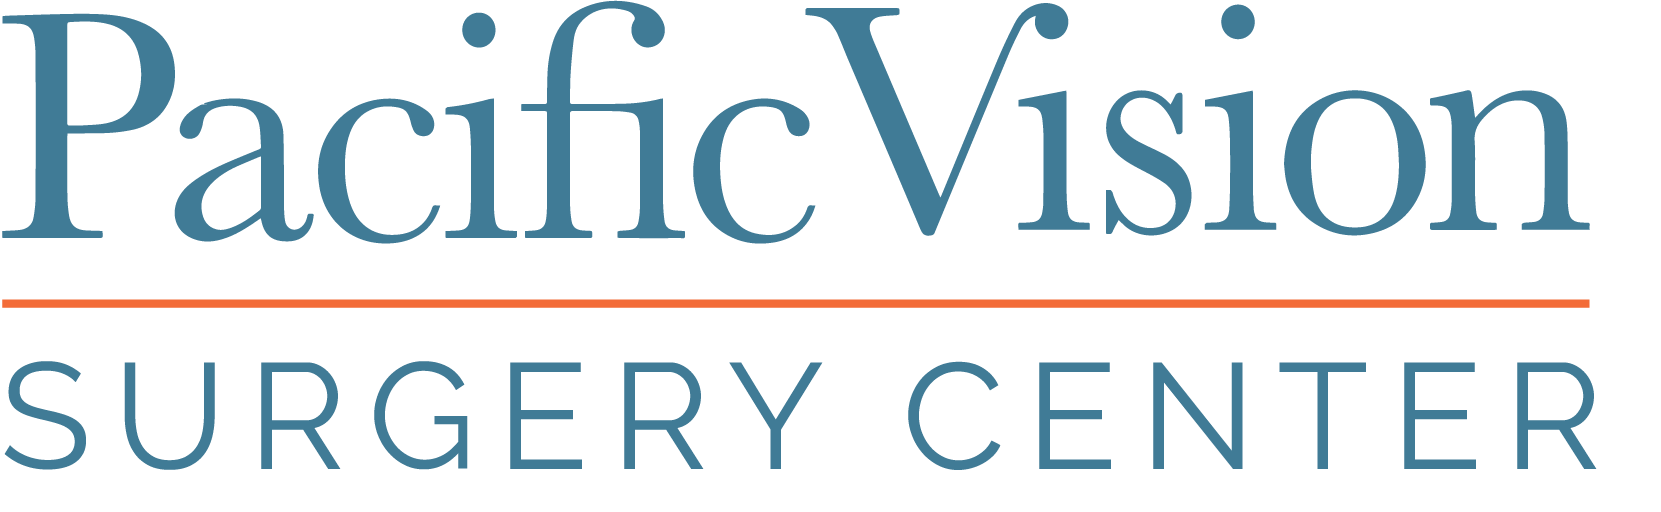 Pacific Vision Surgery Center